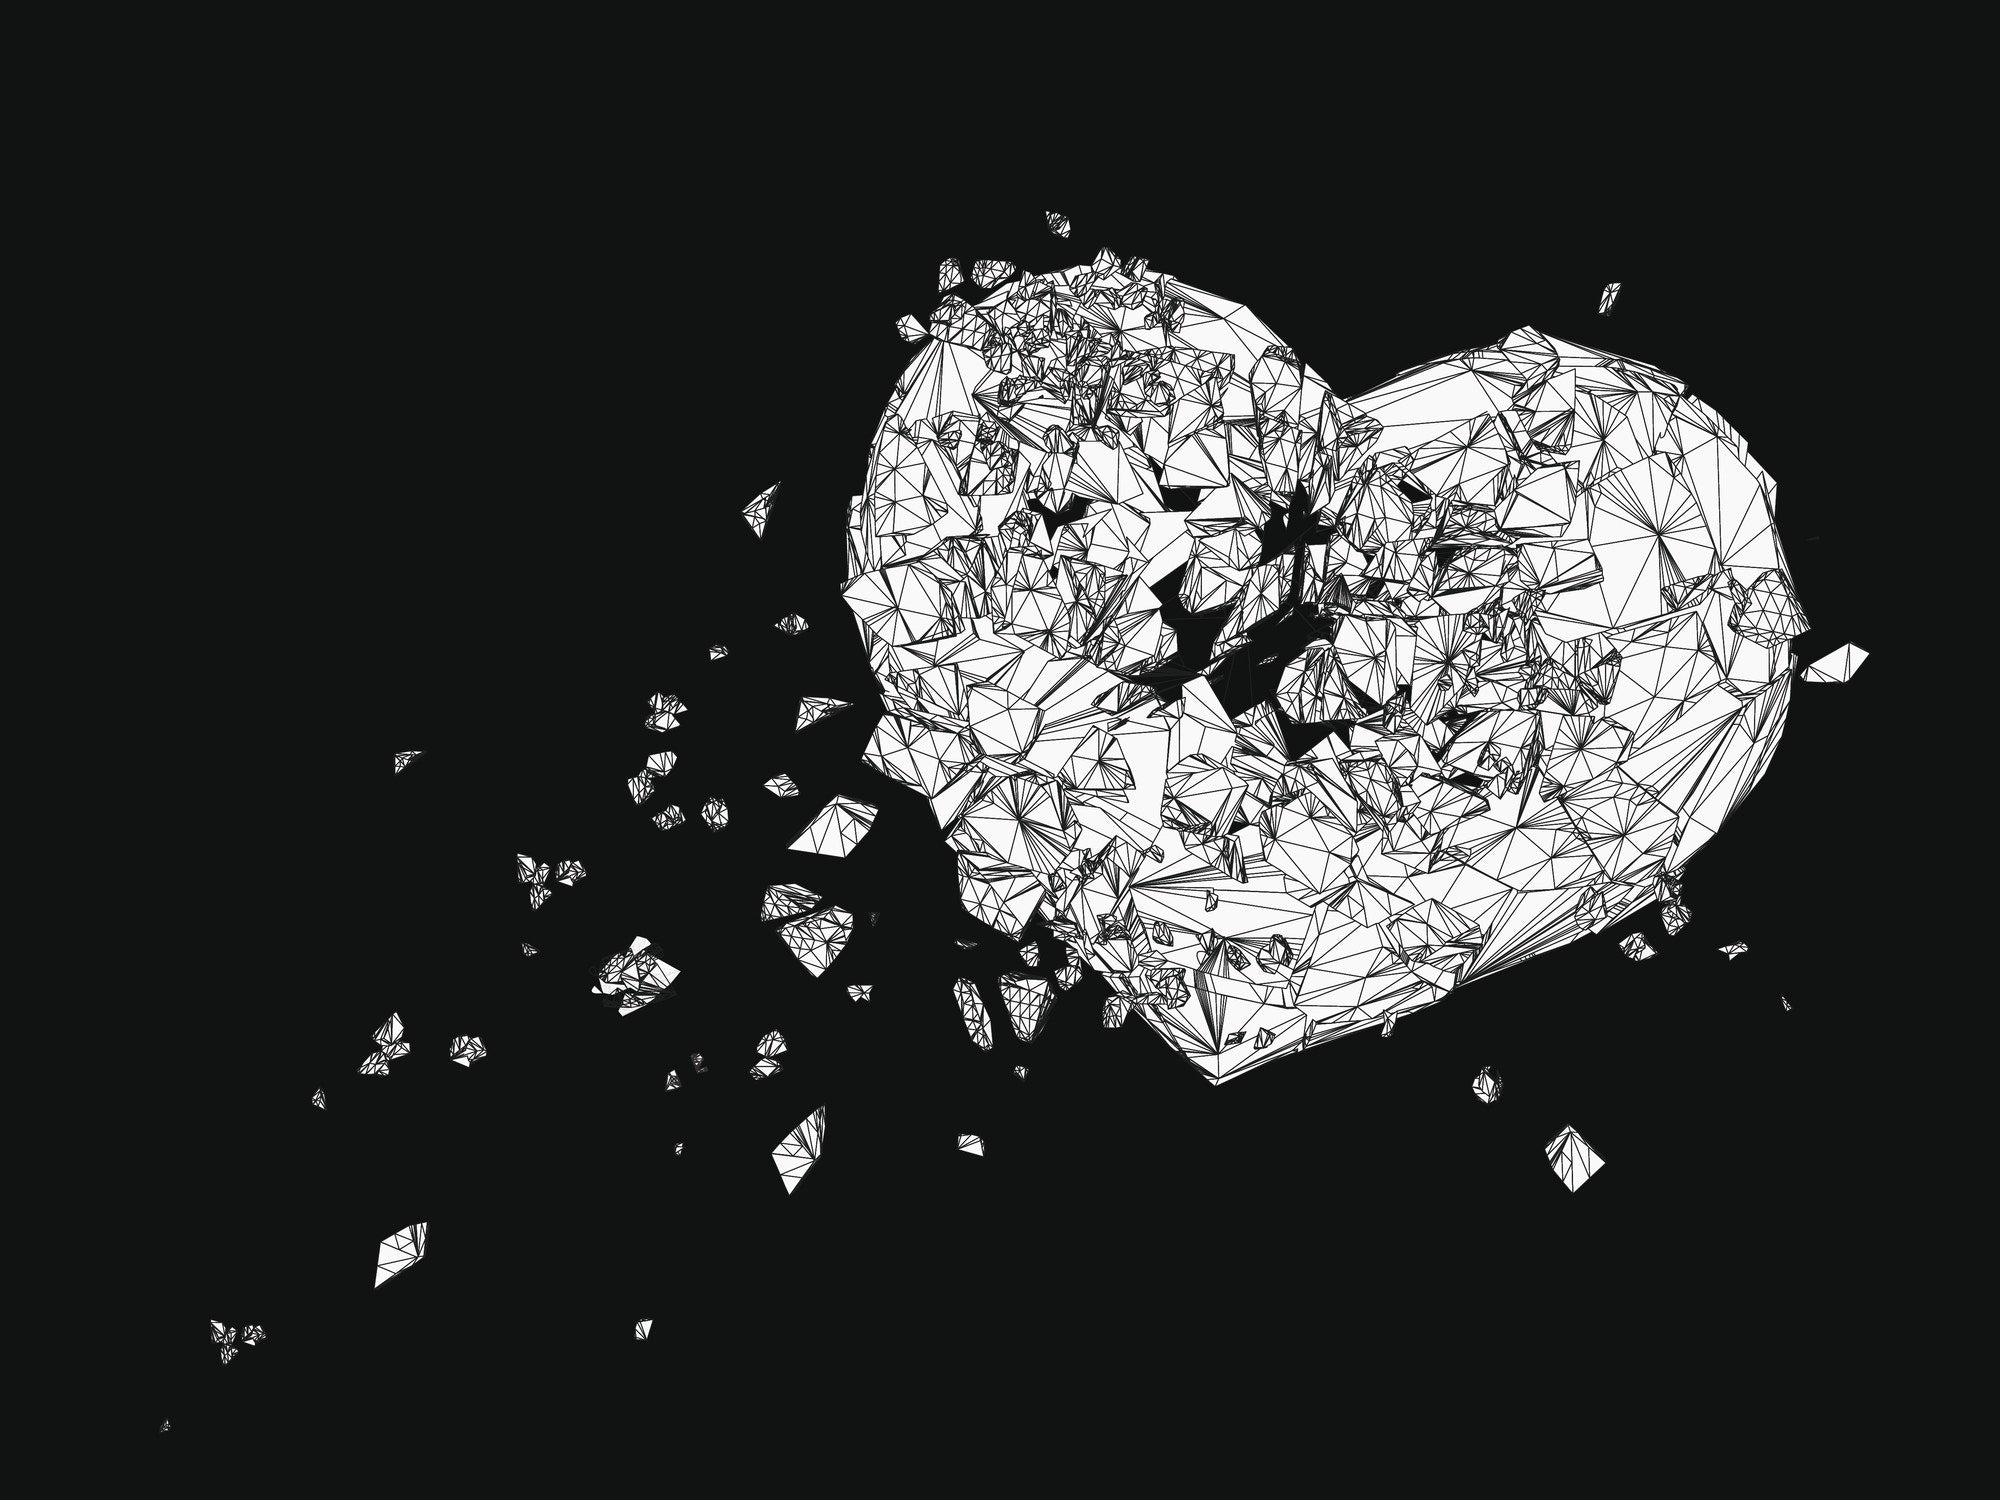 Polygonal broken heart drawing graphic in black and white